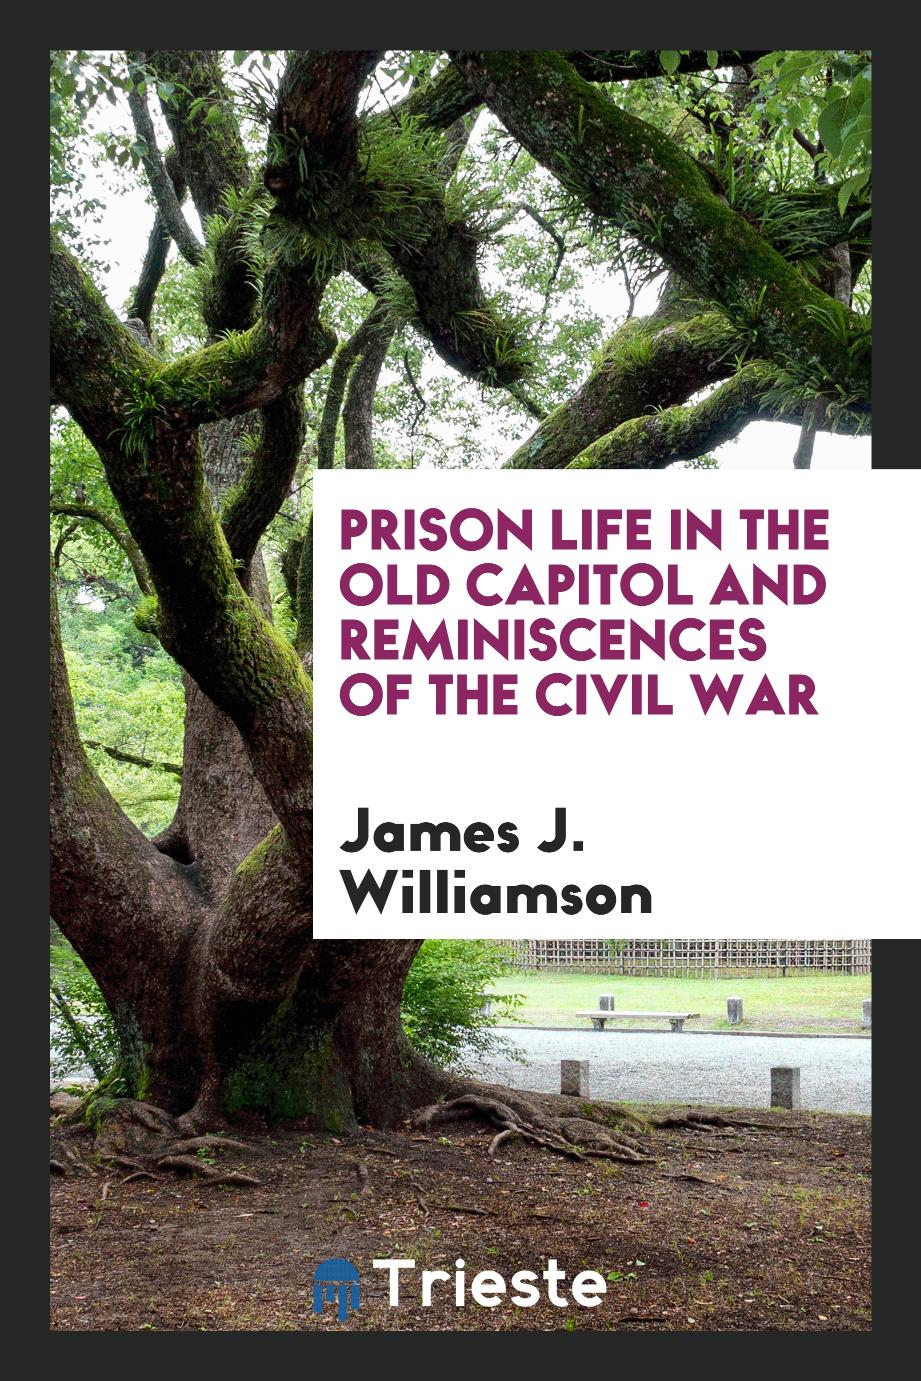 Prison life in the Old Capitol and reminiscences of the Civil War